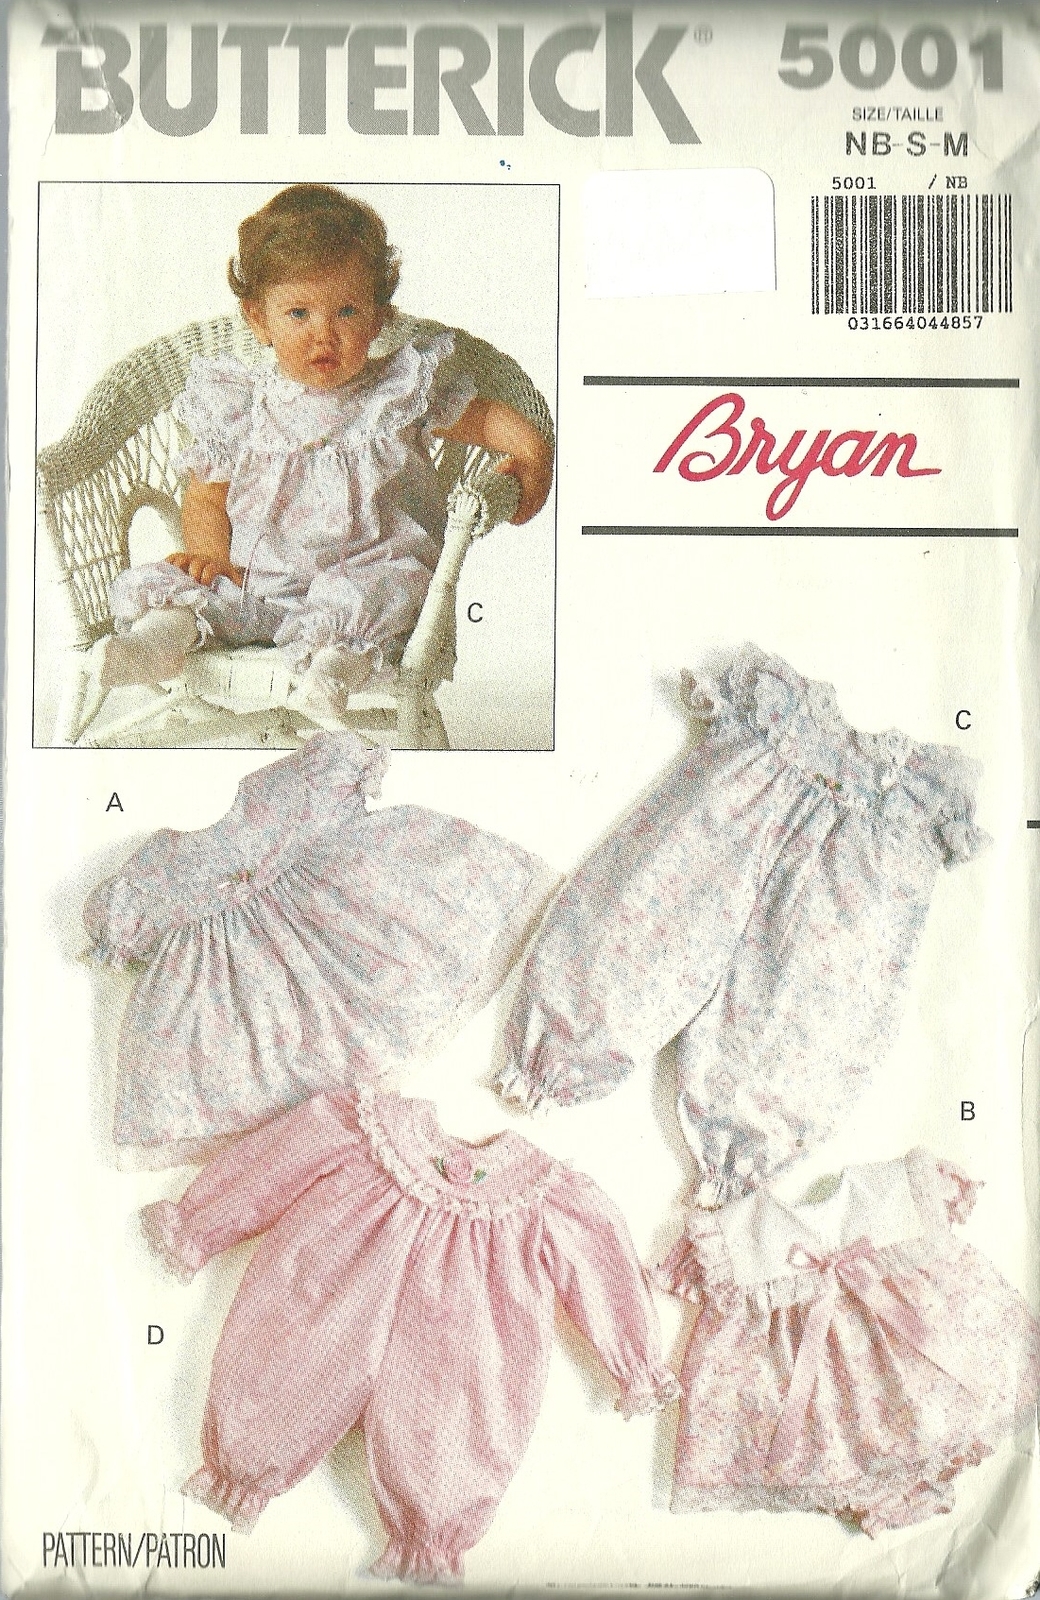 Butterick Sewing Pattern 5001 Girls Infant Dress Party Pants Romper NB S M New - $9.99